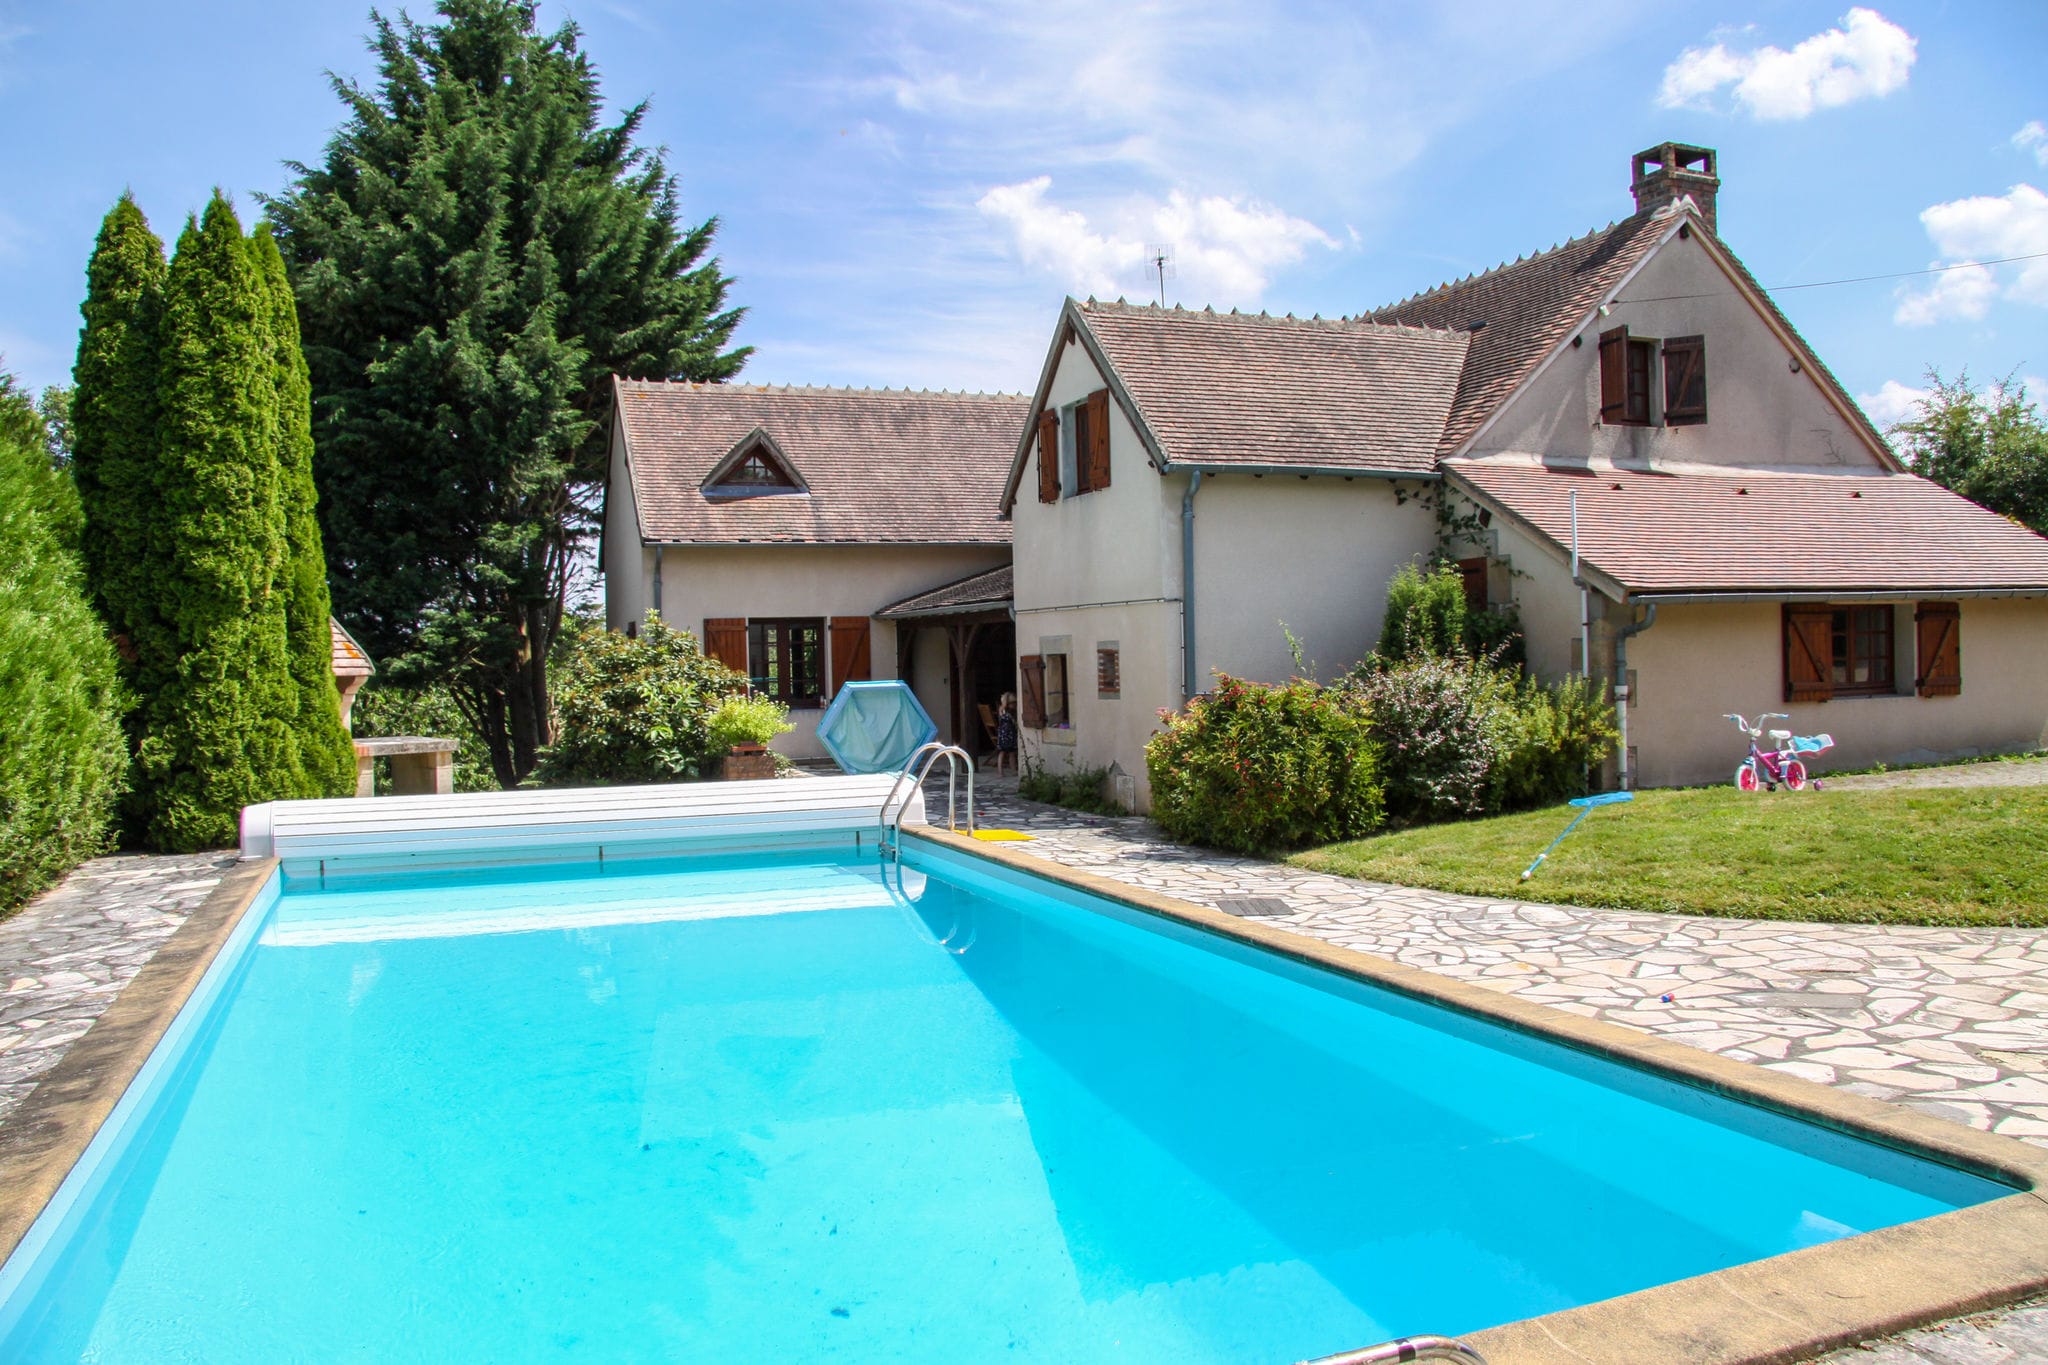 Delightful holiday home with a large private swimming pool, perfect for families